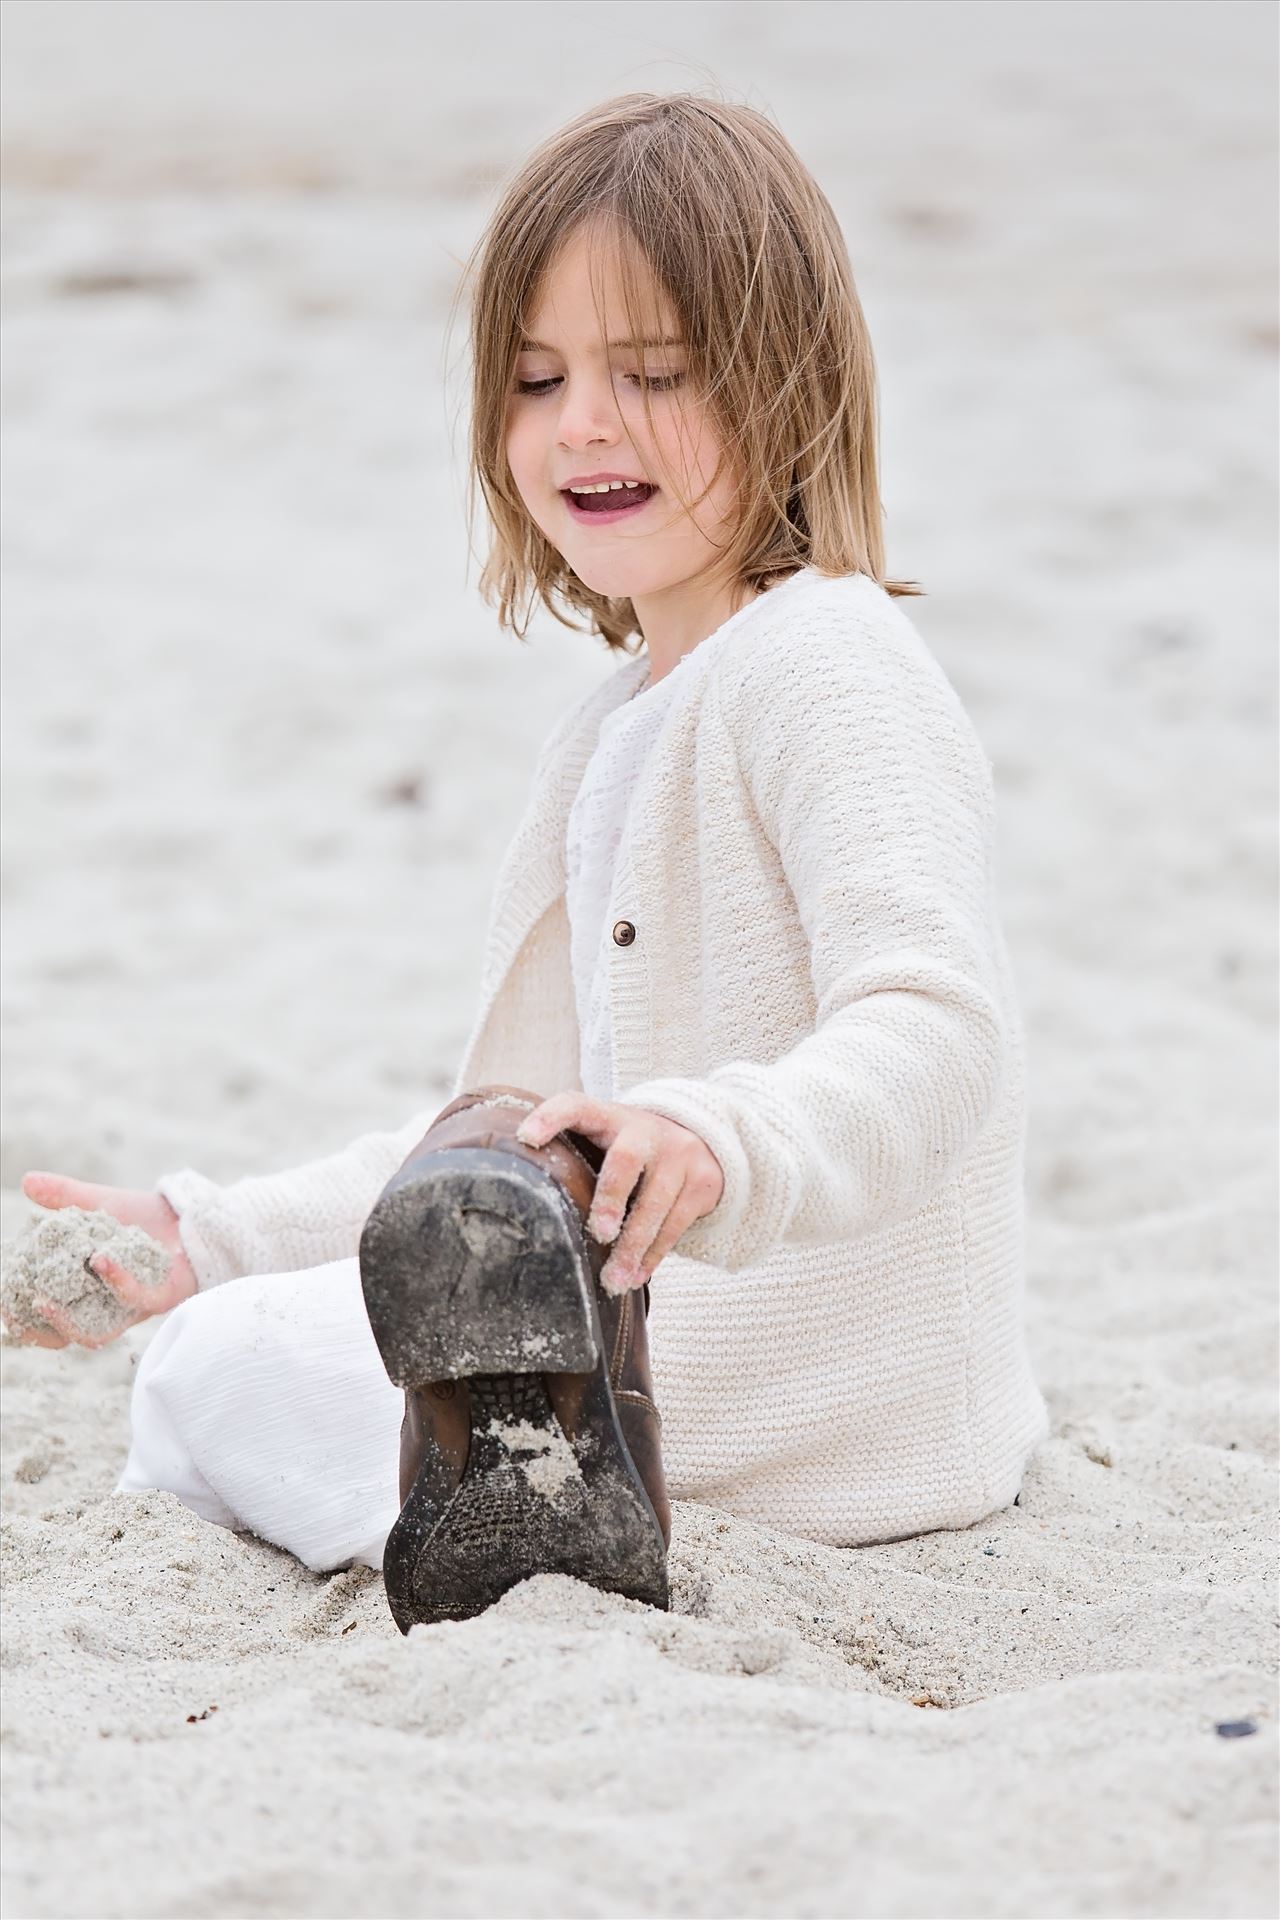 HalfyardFamily 14 - Halfyard Family. Family photography beach session. by Maria Angelopoulos Photogrpahy